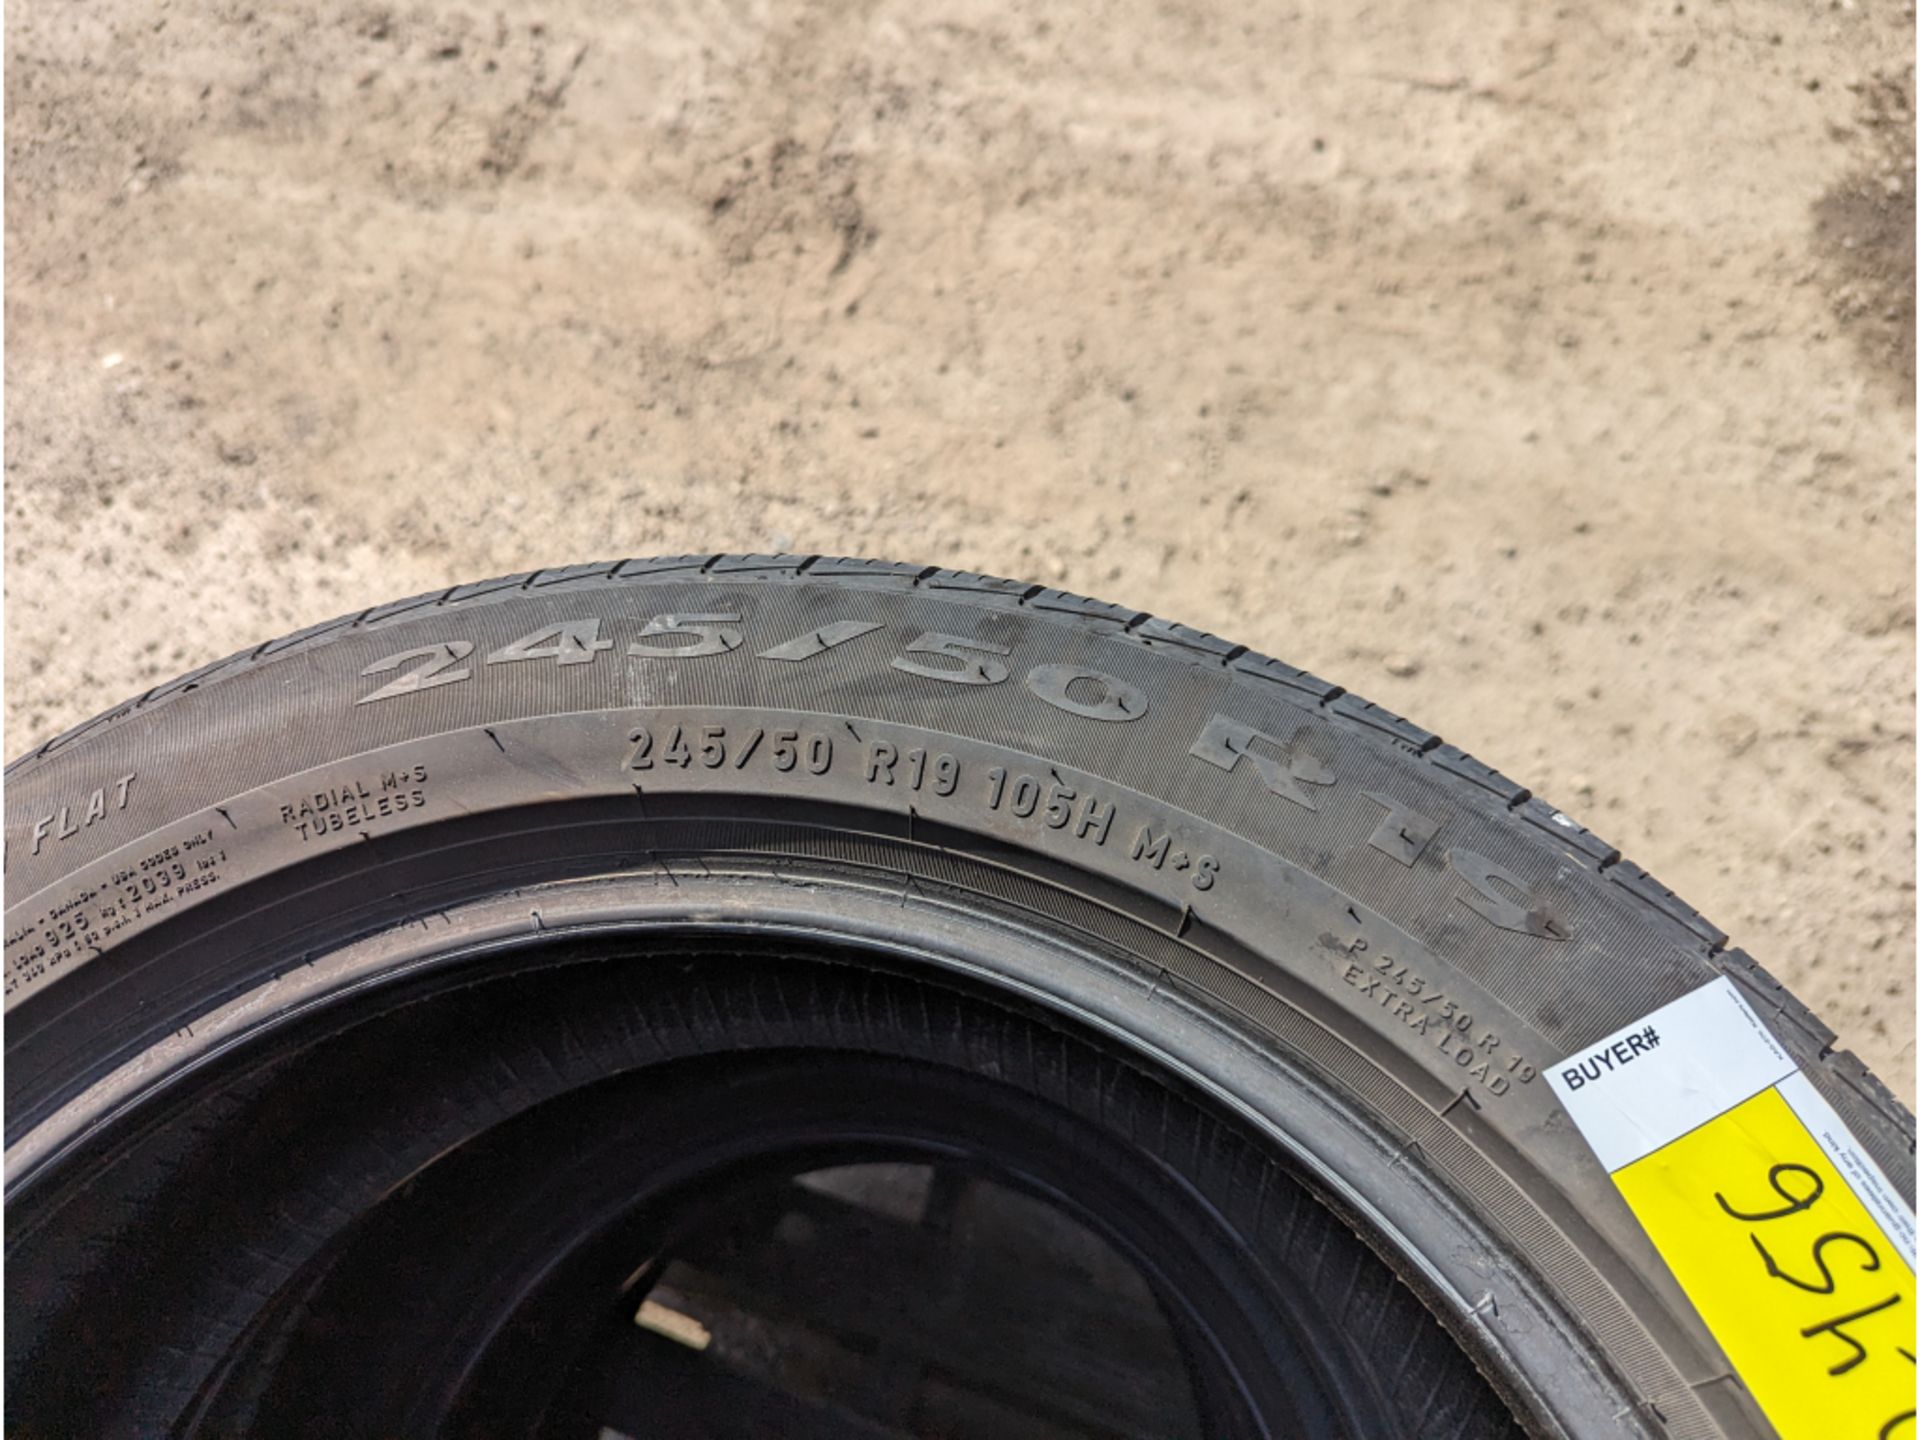 Cinturato P7 245/50R19 Tires, Came off 2021 BMW X3 w/ 35k Miles, Run Flats - Image 4 of 5